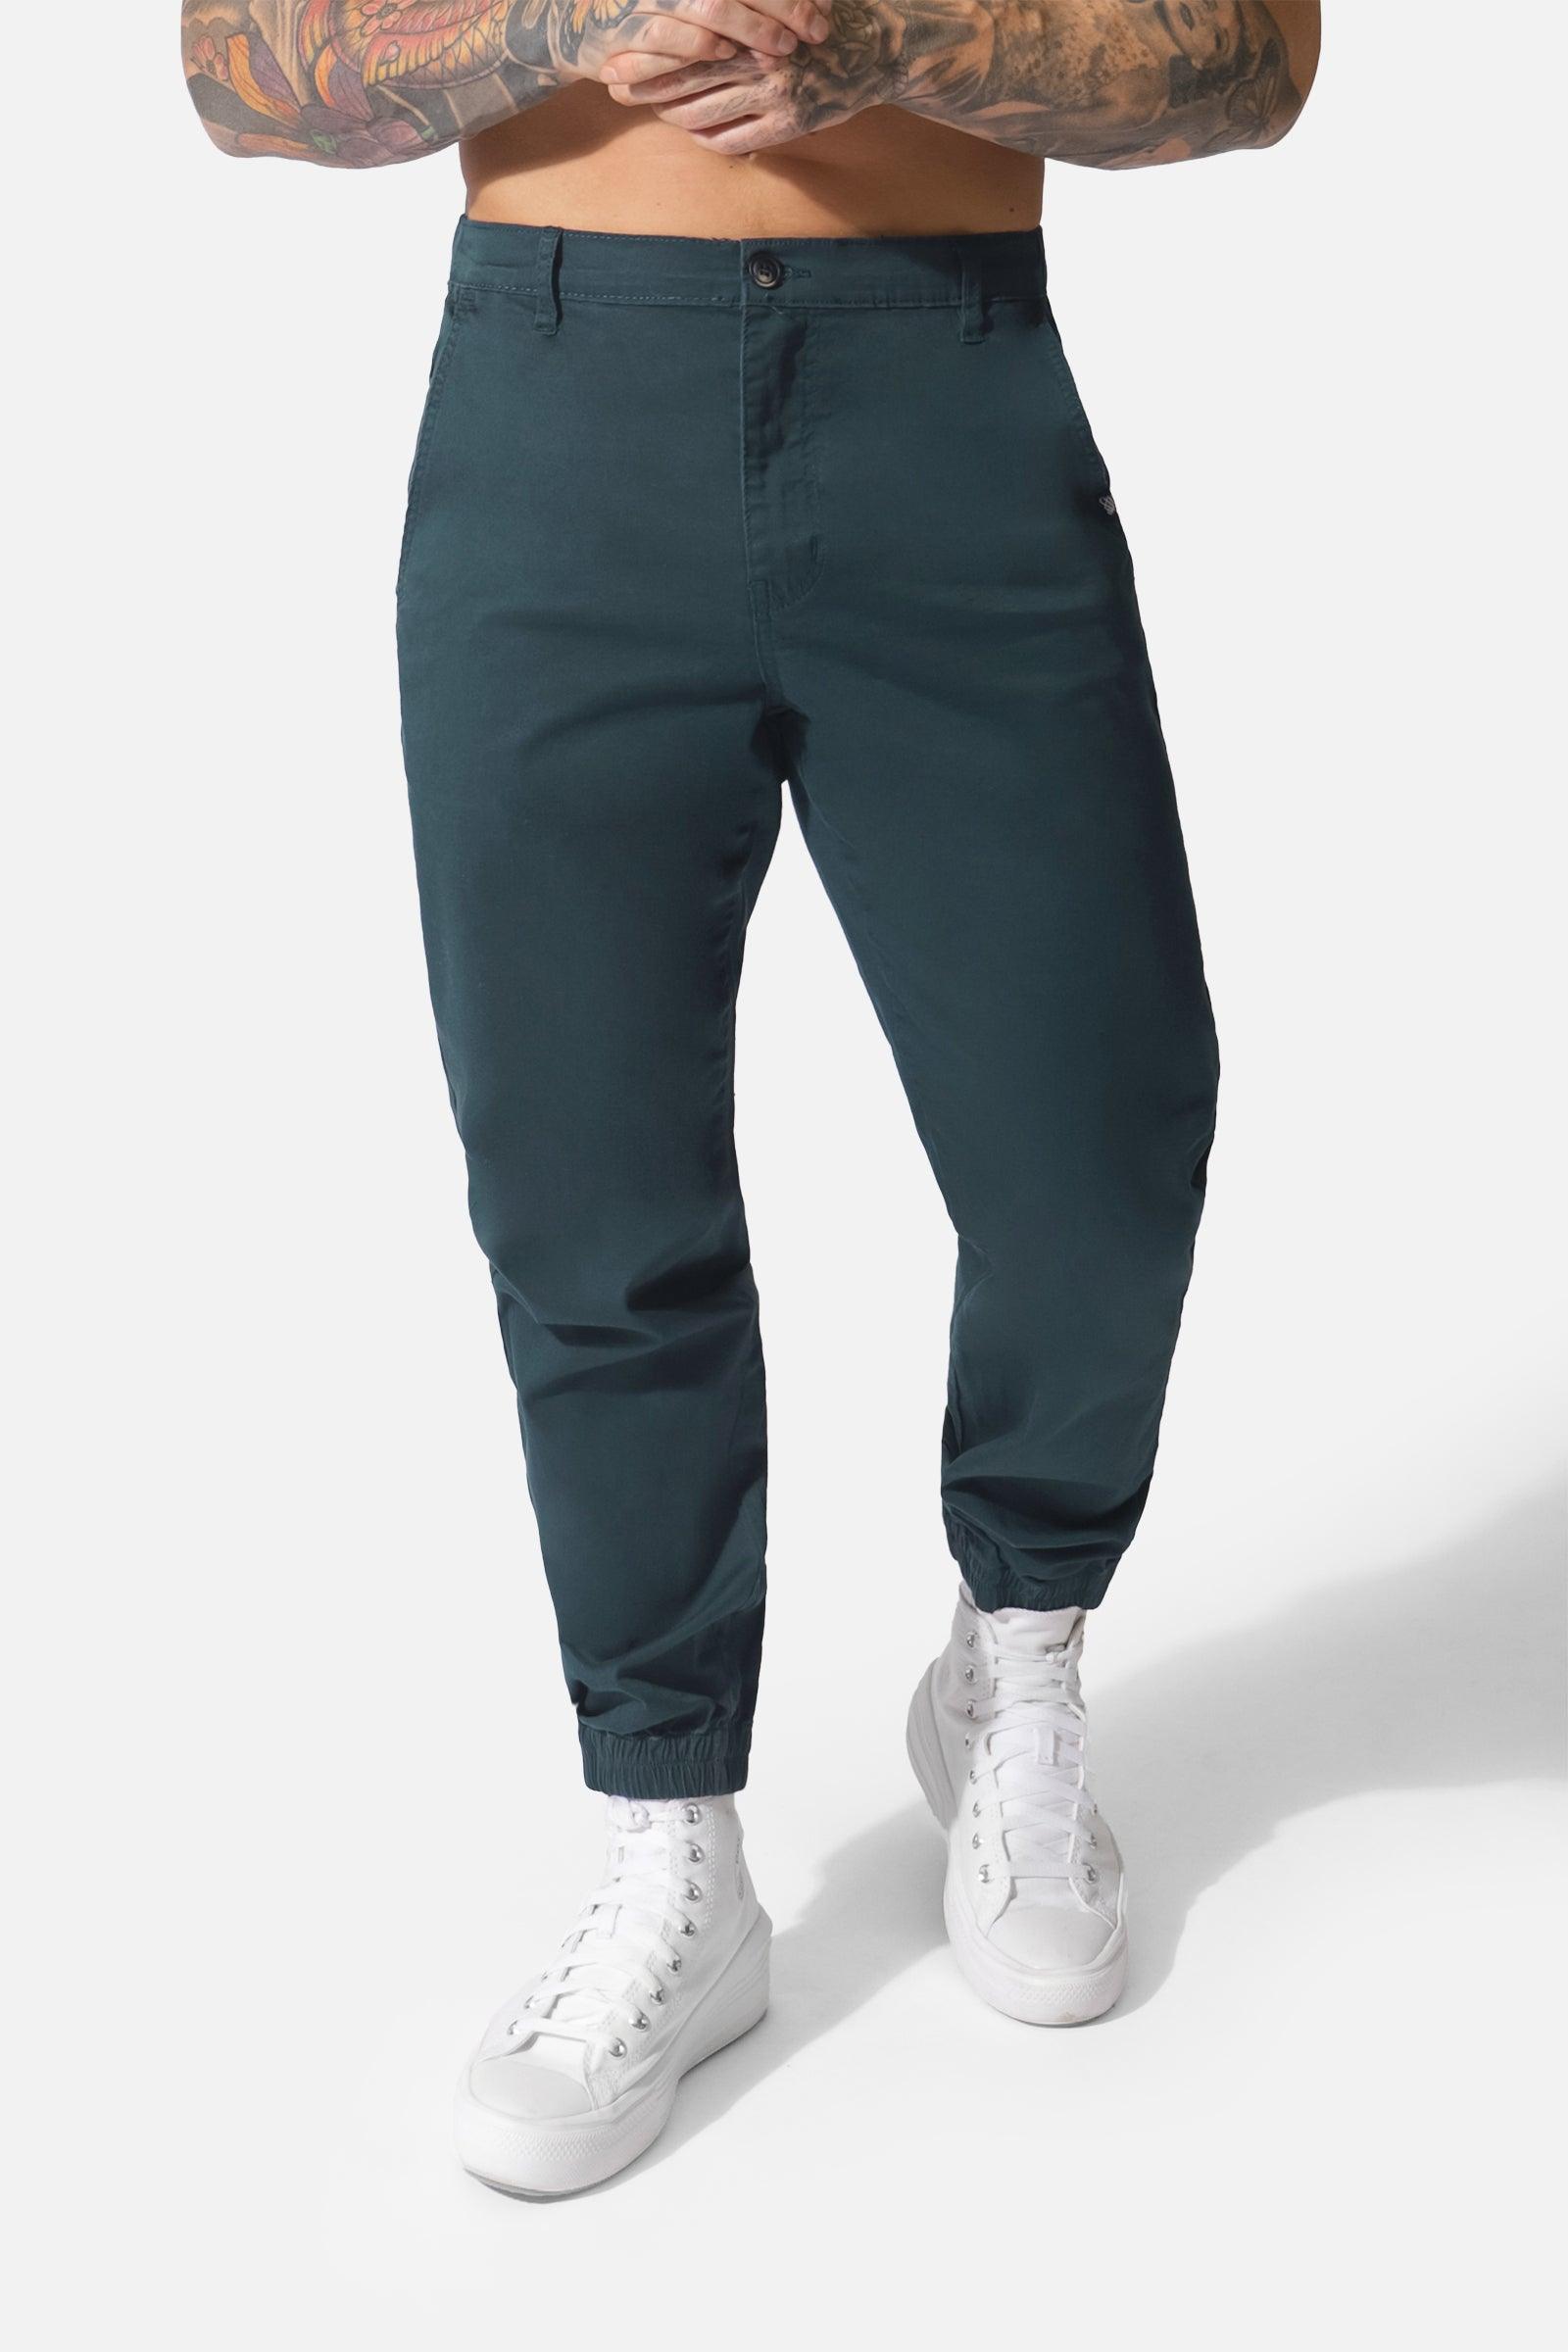 Casual Pants for Men | Bodybuilding Fitness & Casual Wear | Jed North